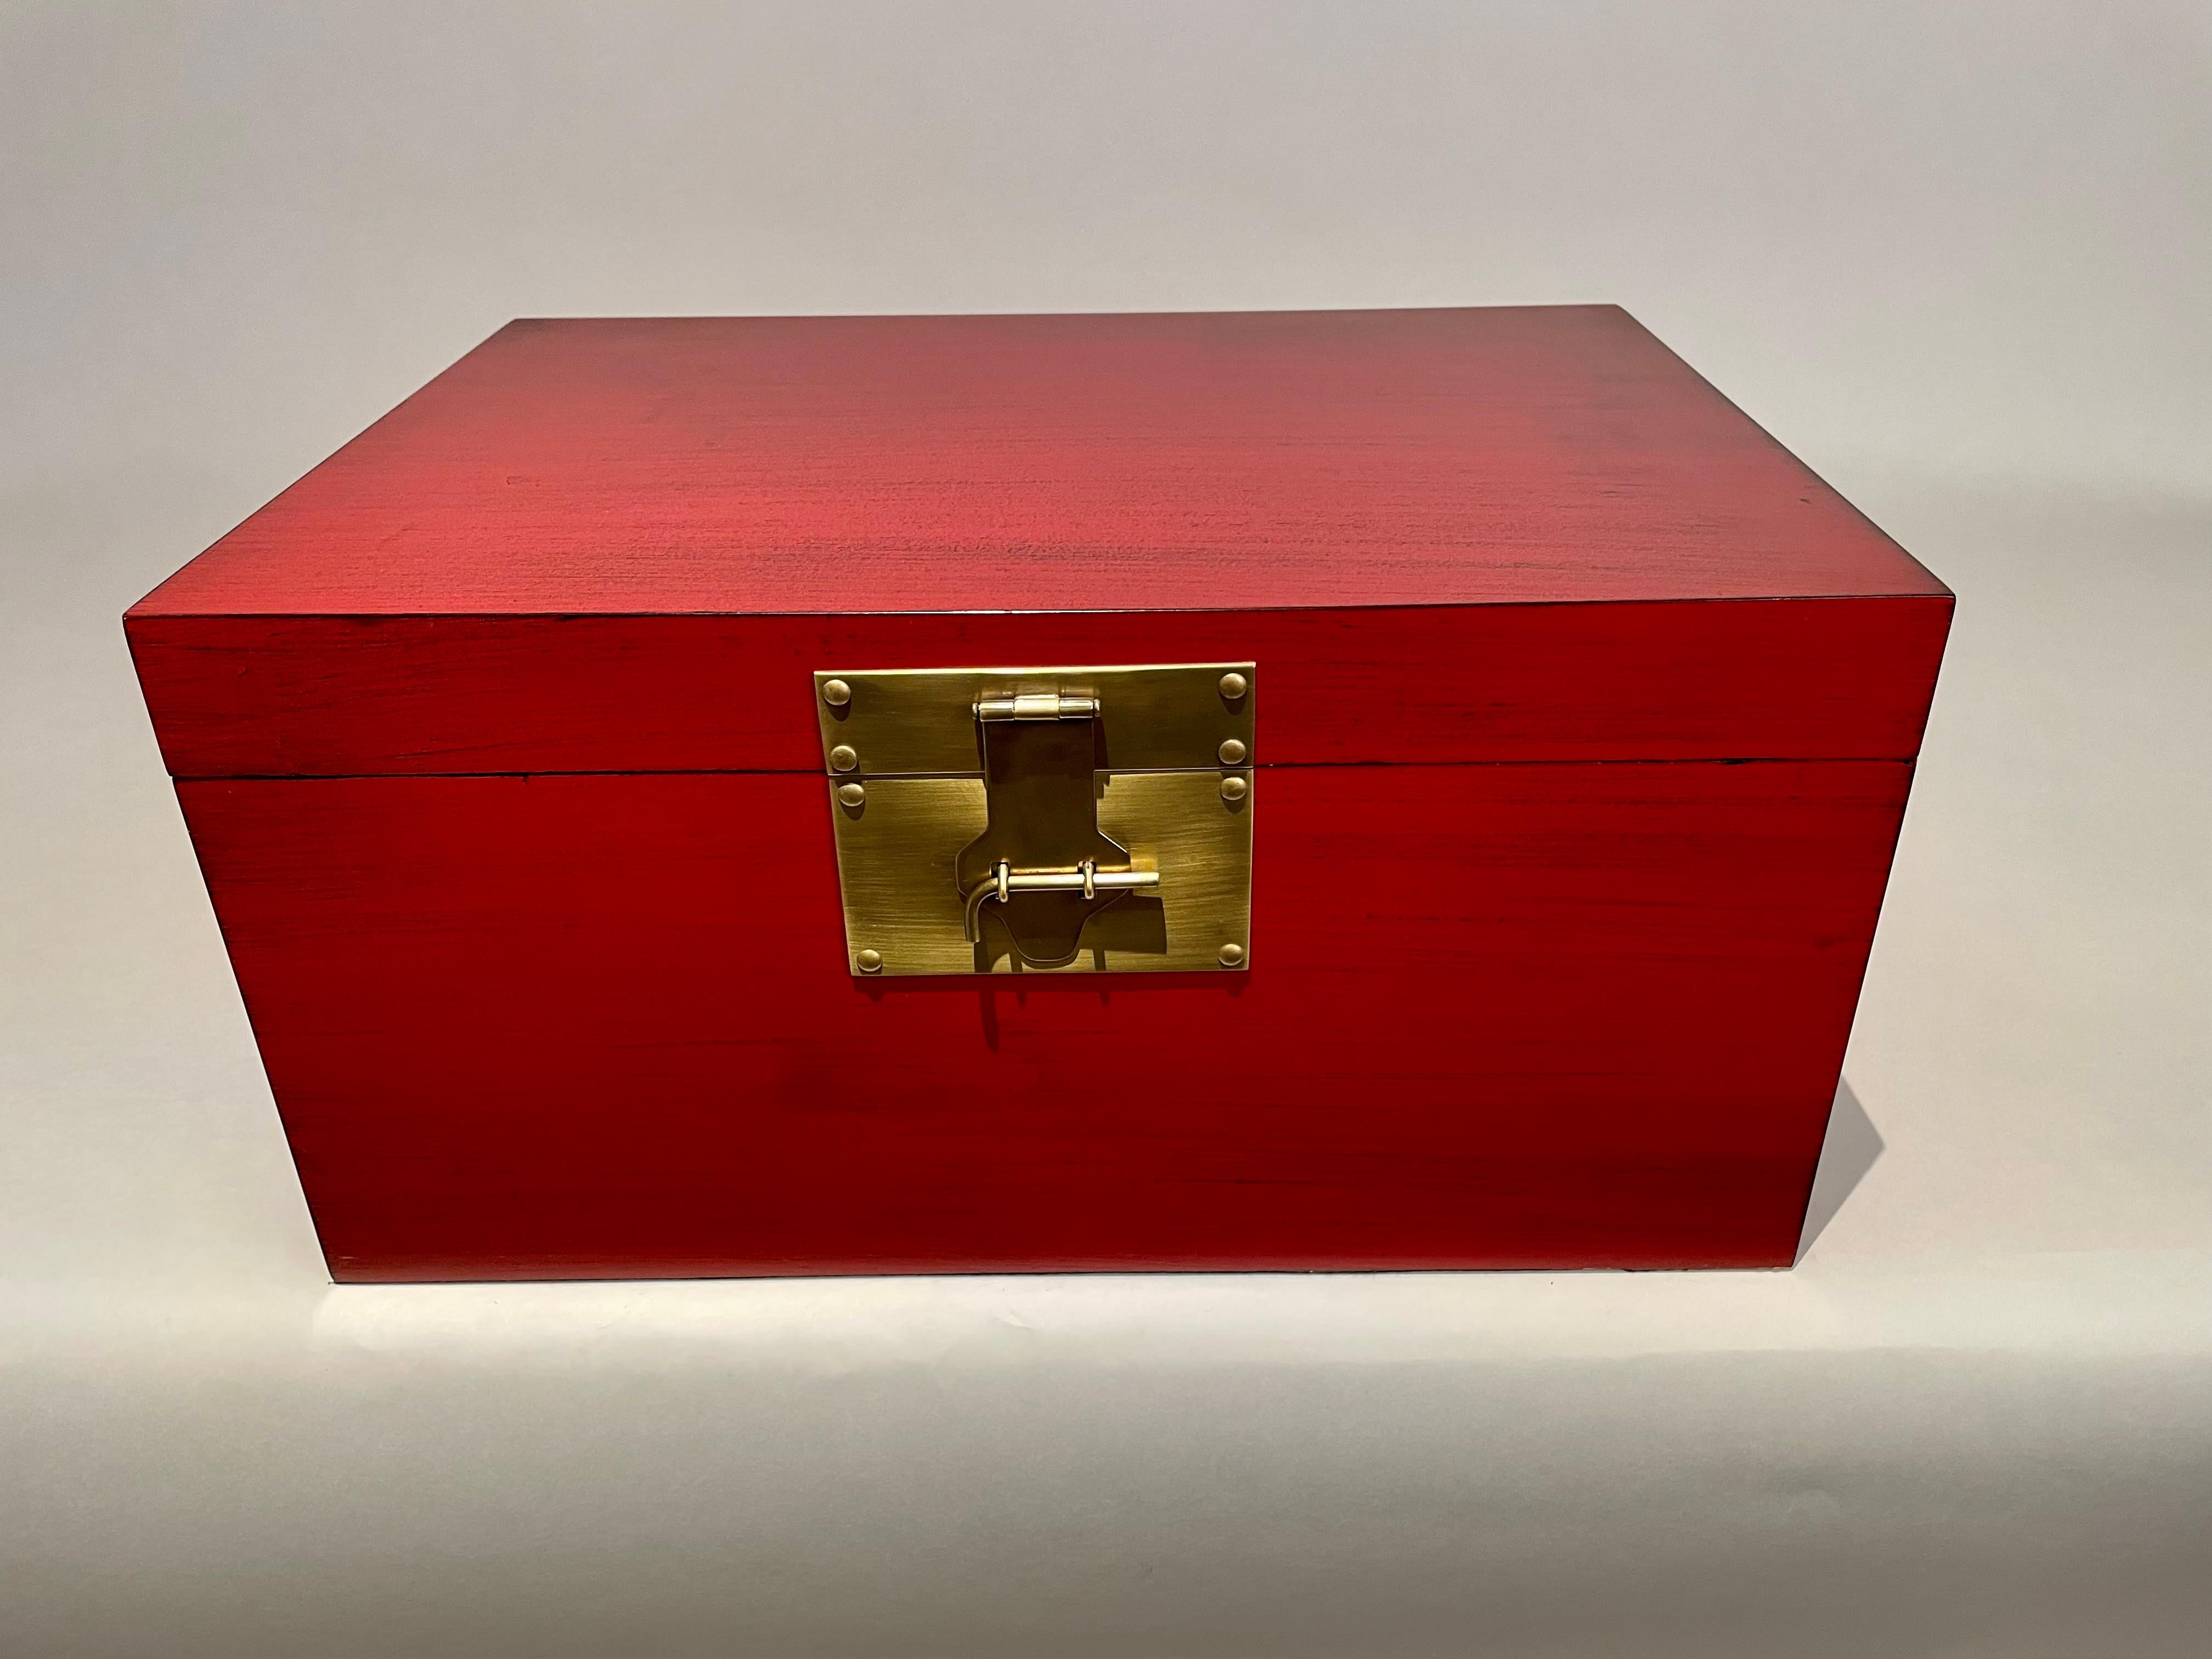 Chinese red and black lacquered box with fine brass mounts in the Chinese Export style. Lovely color. A refined and classic decorative box, beautiful craftsmanship. 
20 wide 14 deep 10 high
We also have a smaller companion box, they look great